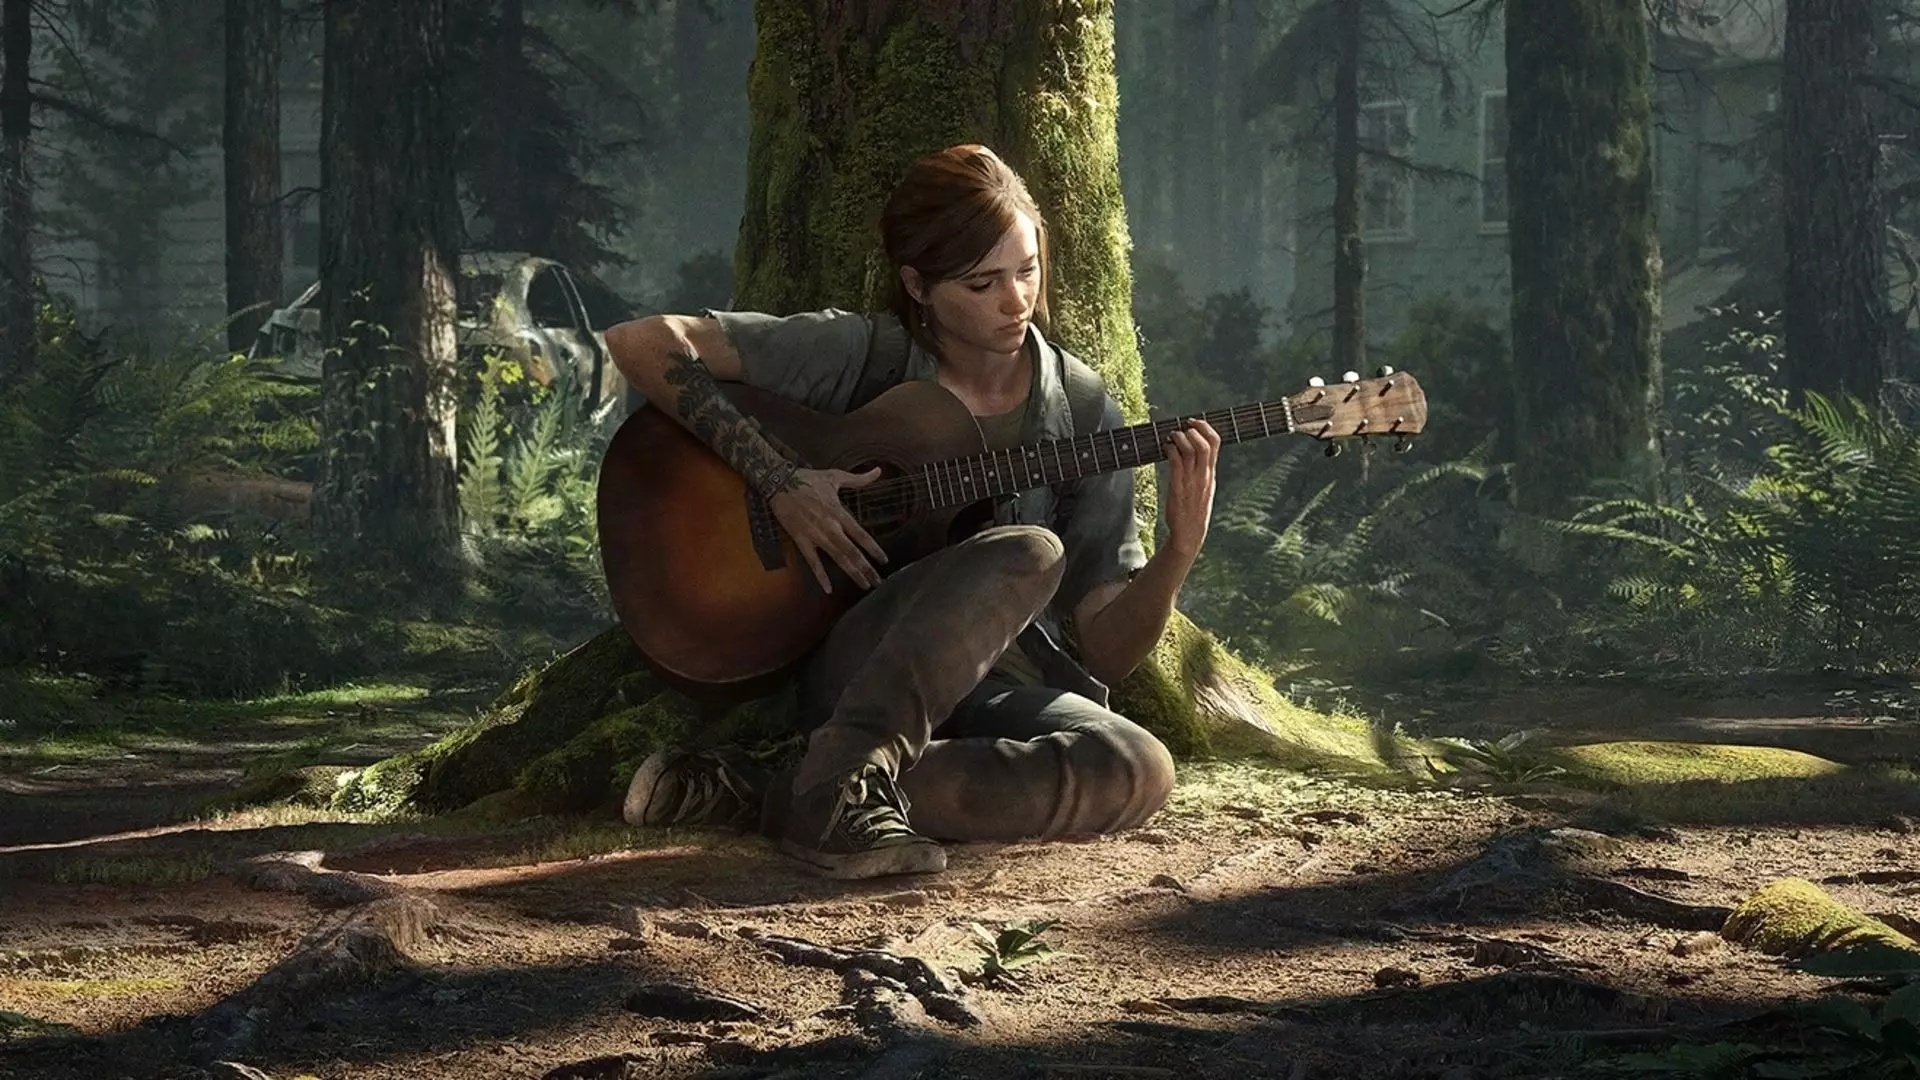 The Last of Us Part II released to critical acclaim, but its development put devs in hospital /